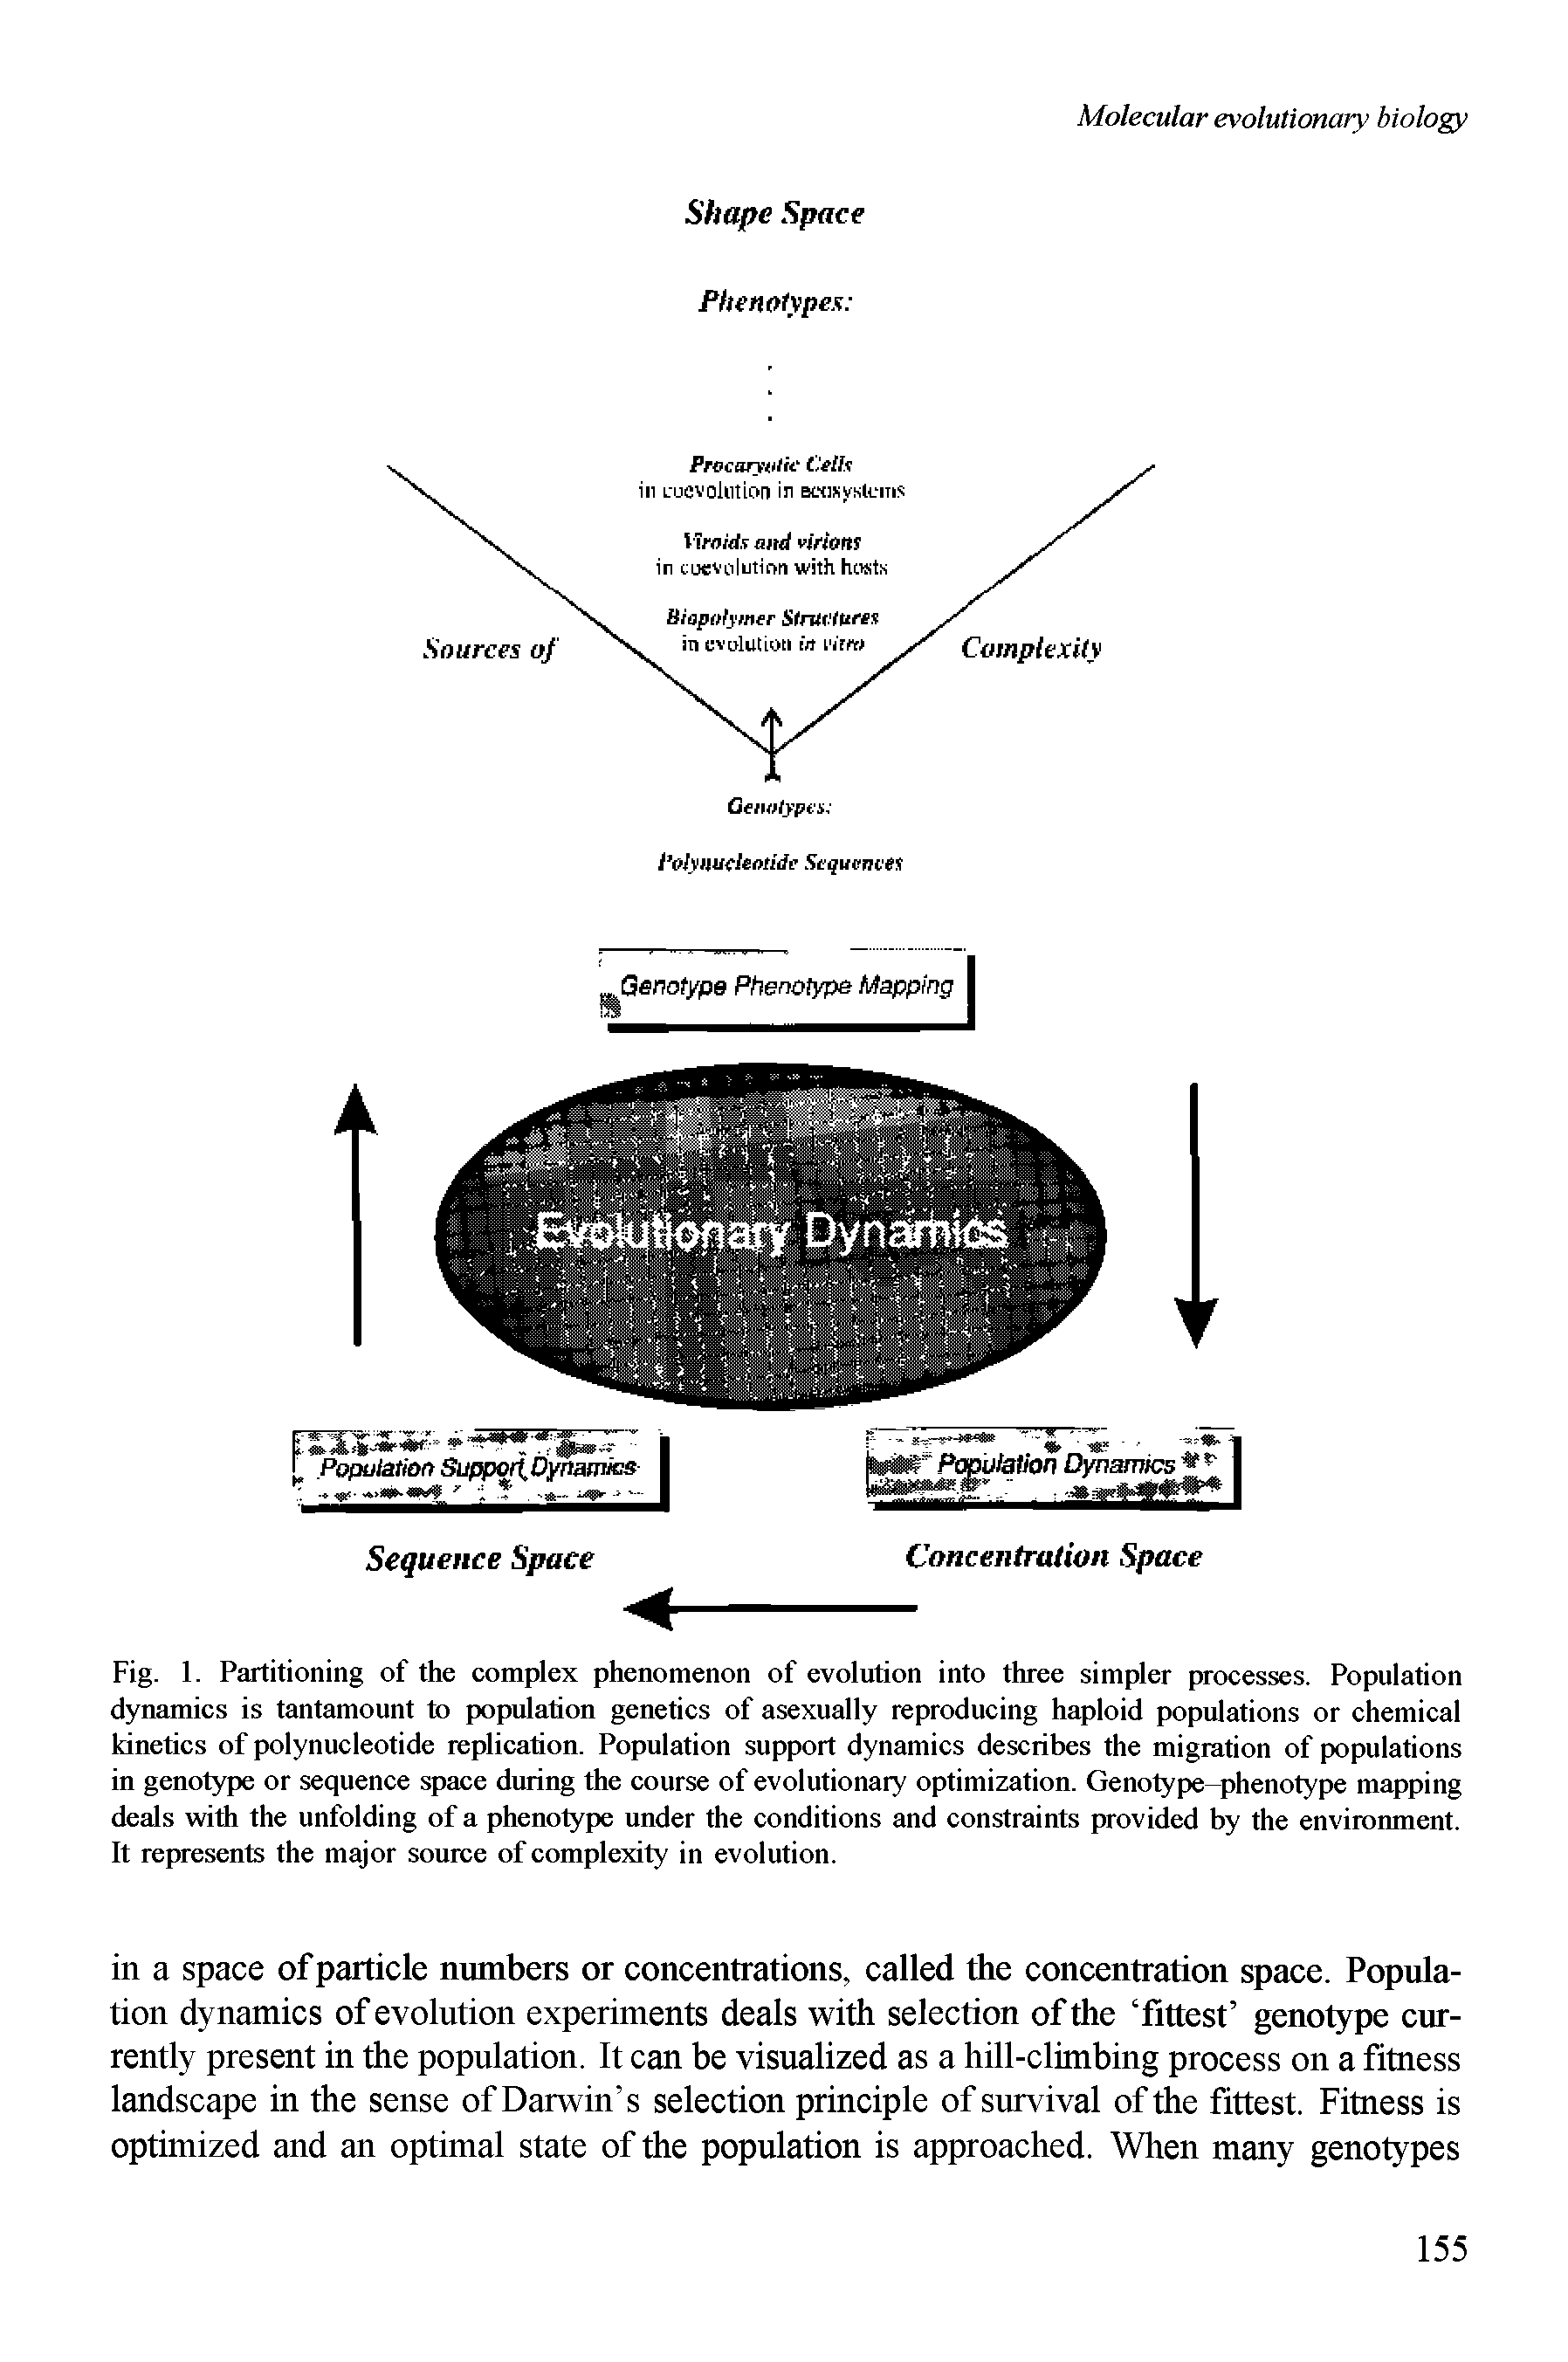 Fig. 1. Partitioning of the complex phenomenon of evolution into three simpler processes. Population dynamics is tantamount to population genetics of asexually reproducing haploid populations or chemical kinetics of polynucleotide replication. Population support dynamics describes the migration of populations in genotype or sequence space during the course of evolutionary optimization. Genotype-phenotype mapping deals with the unfolding of a phenotype under the conditions and constraints provided by the environment. It represents the major source of complexity in evolution.